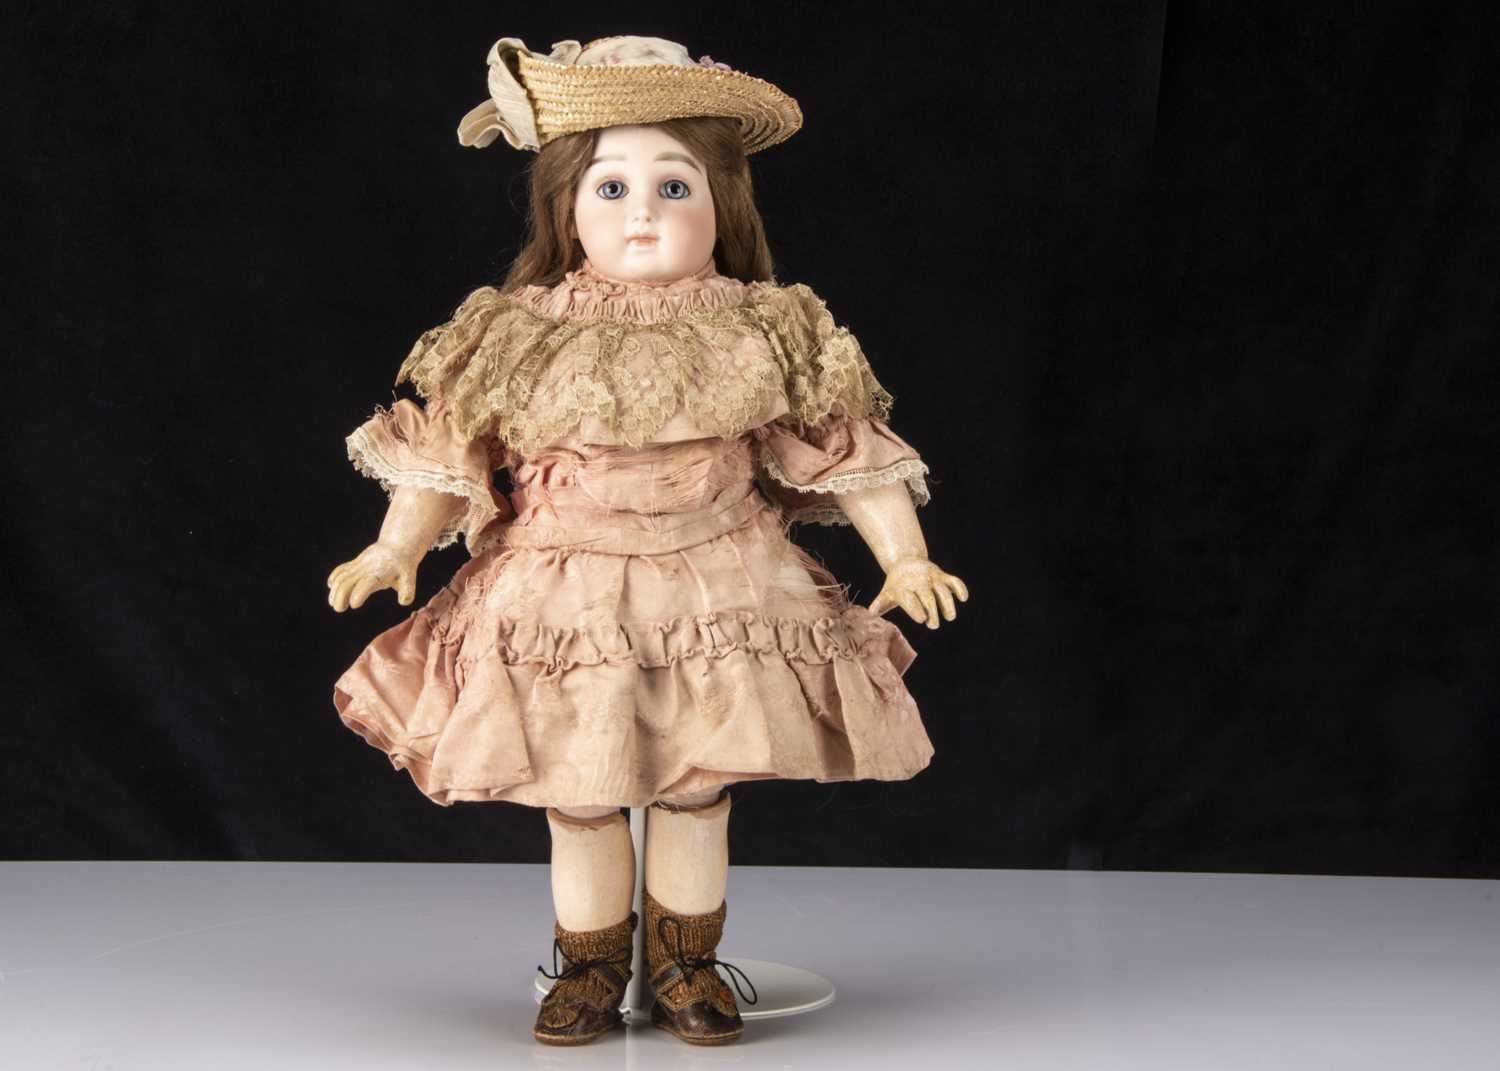 Lot 22 - An early Portrait Jumeau pressed bisque bebe size 7